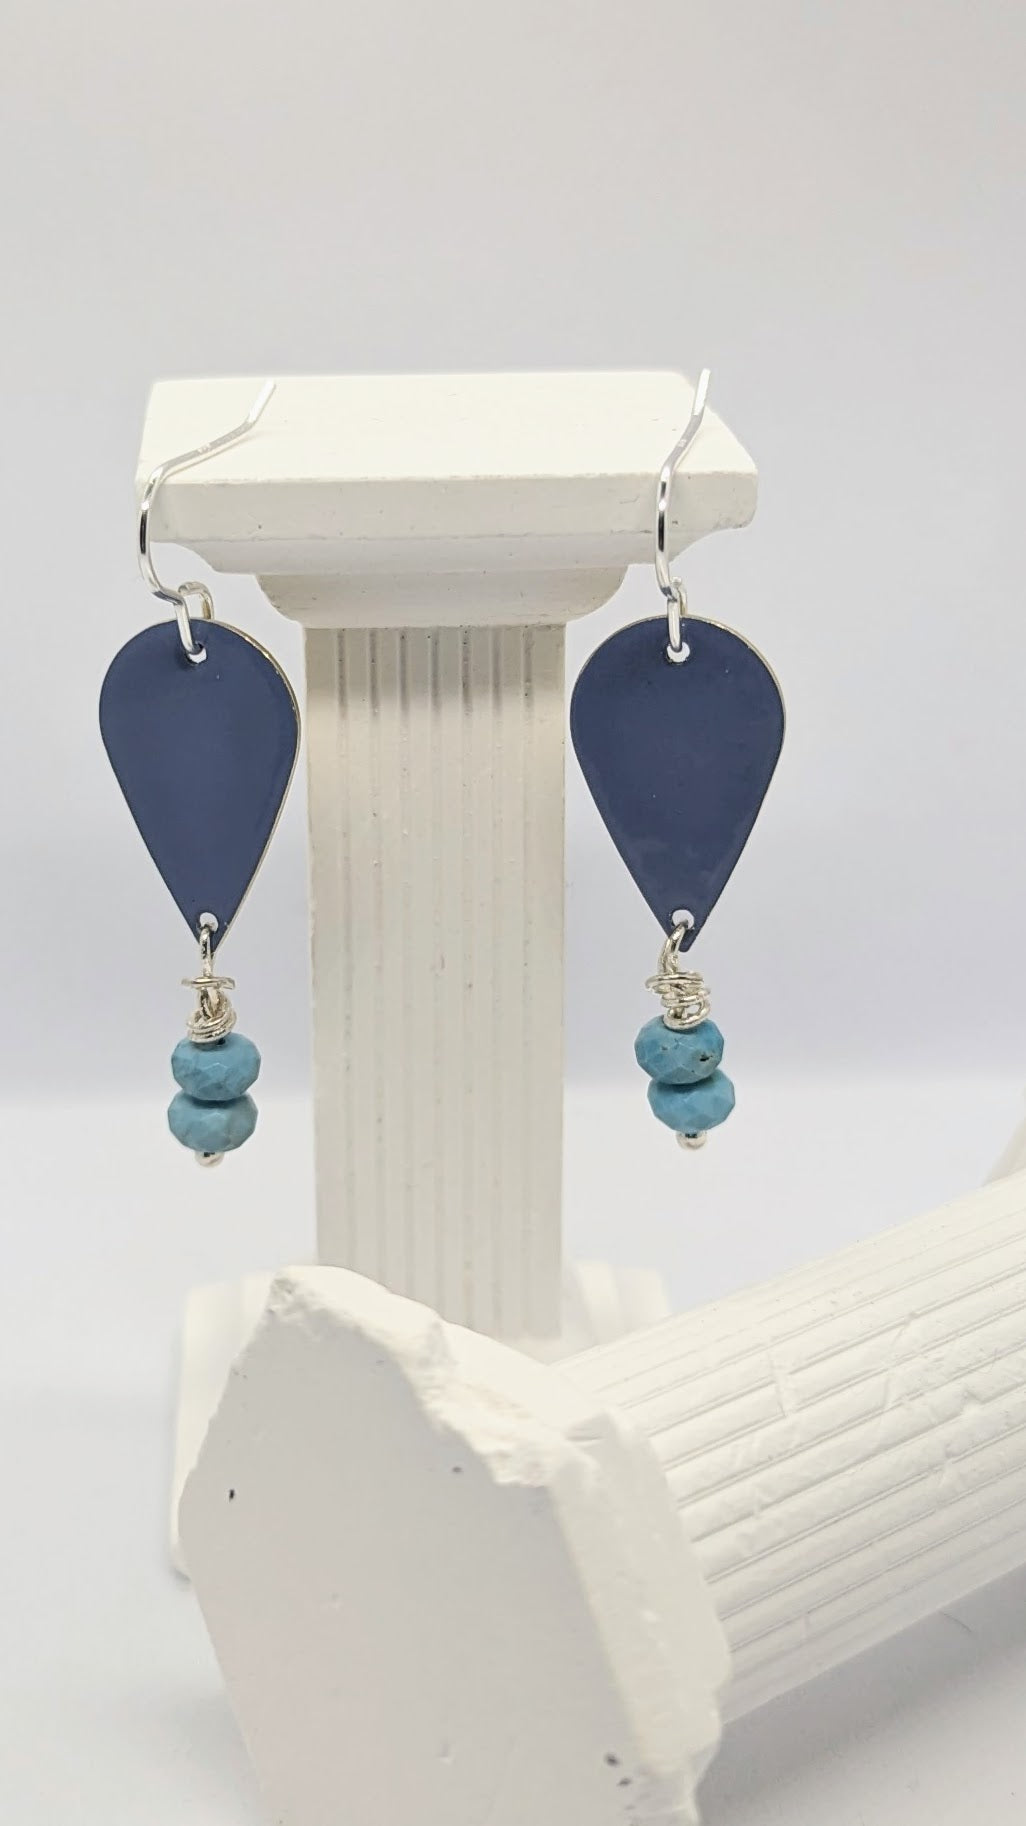 Earrings displayed on white columns. Enamelled tear drop brass in a blue colour embellished with two turquoise stones each. The earrings are hanging from sterling silver earring hooks.  